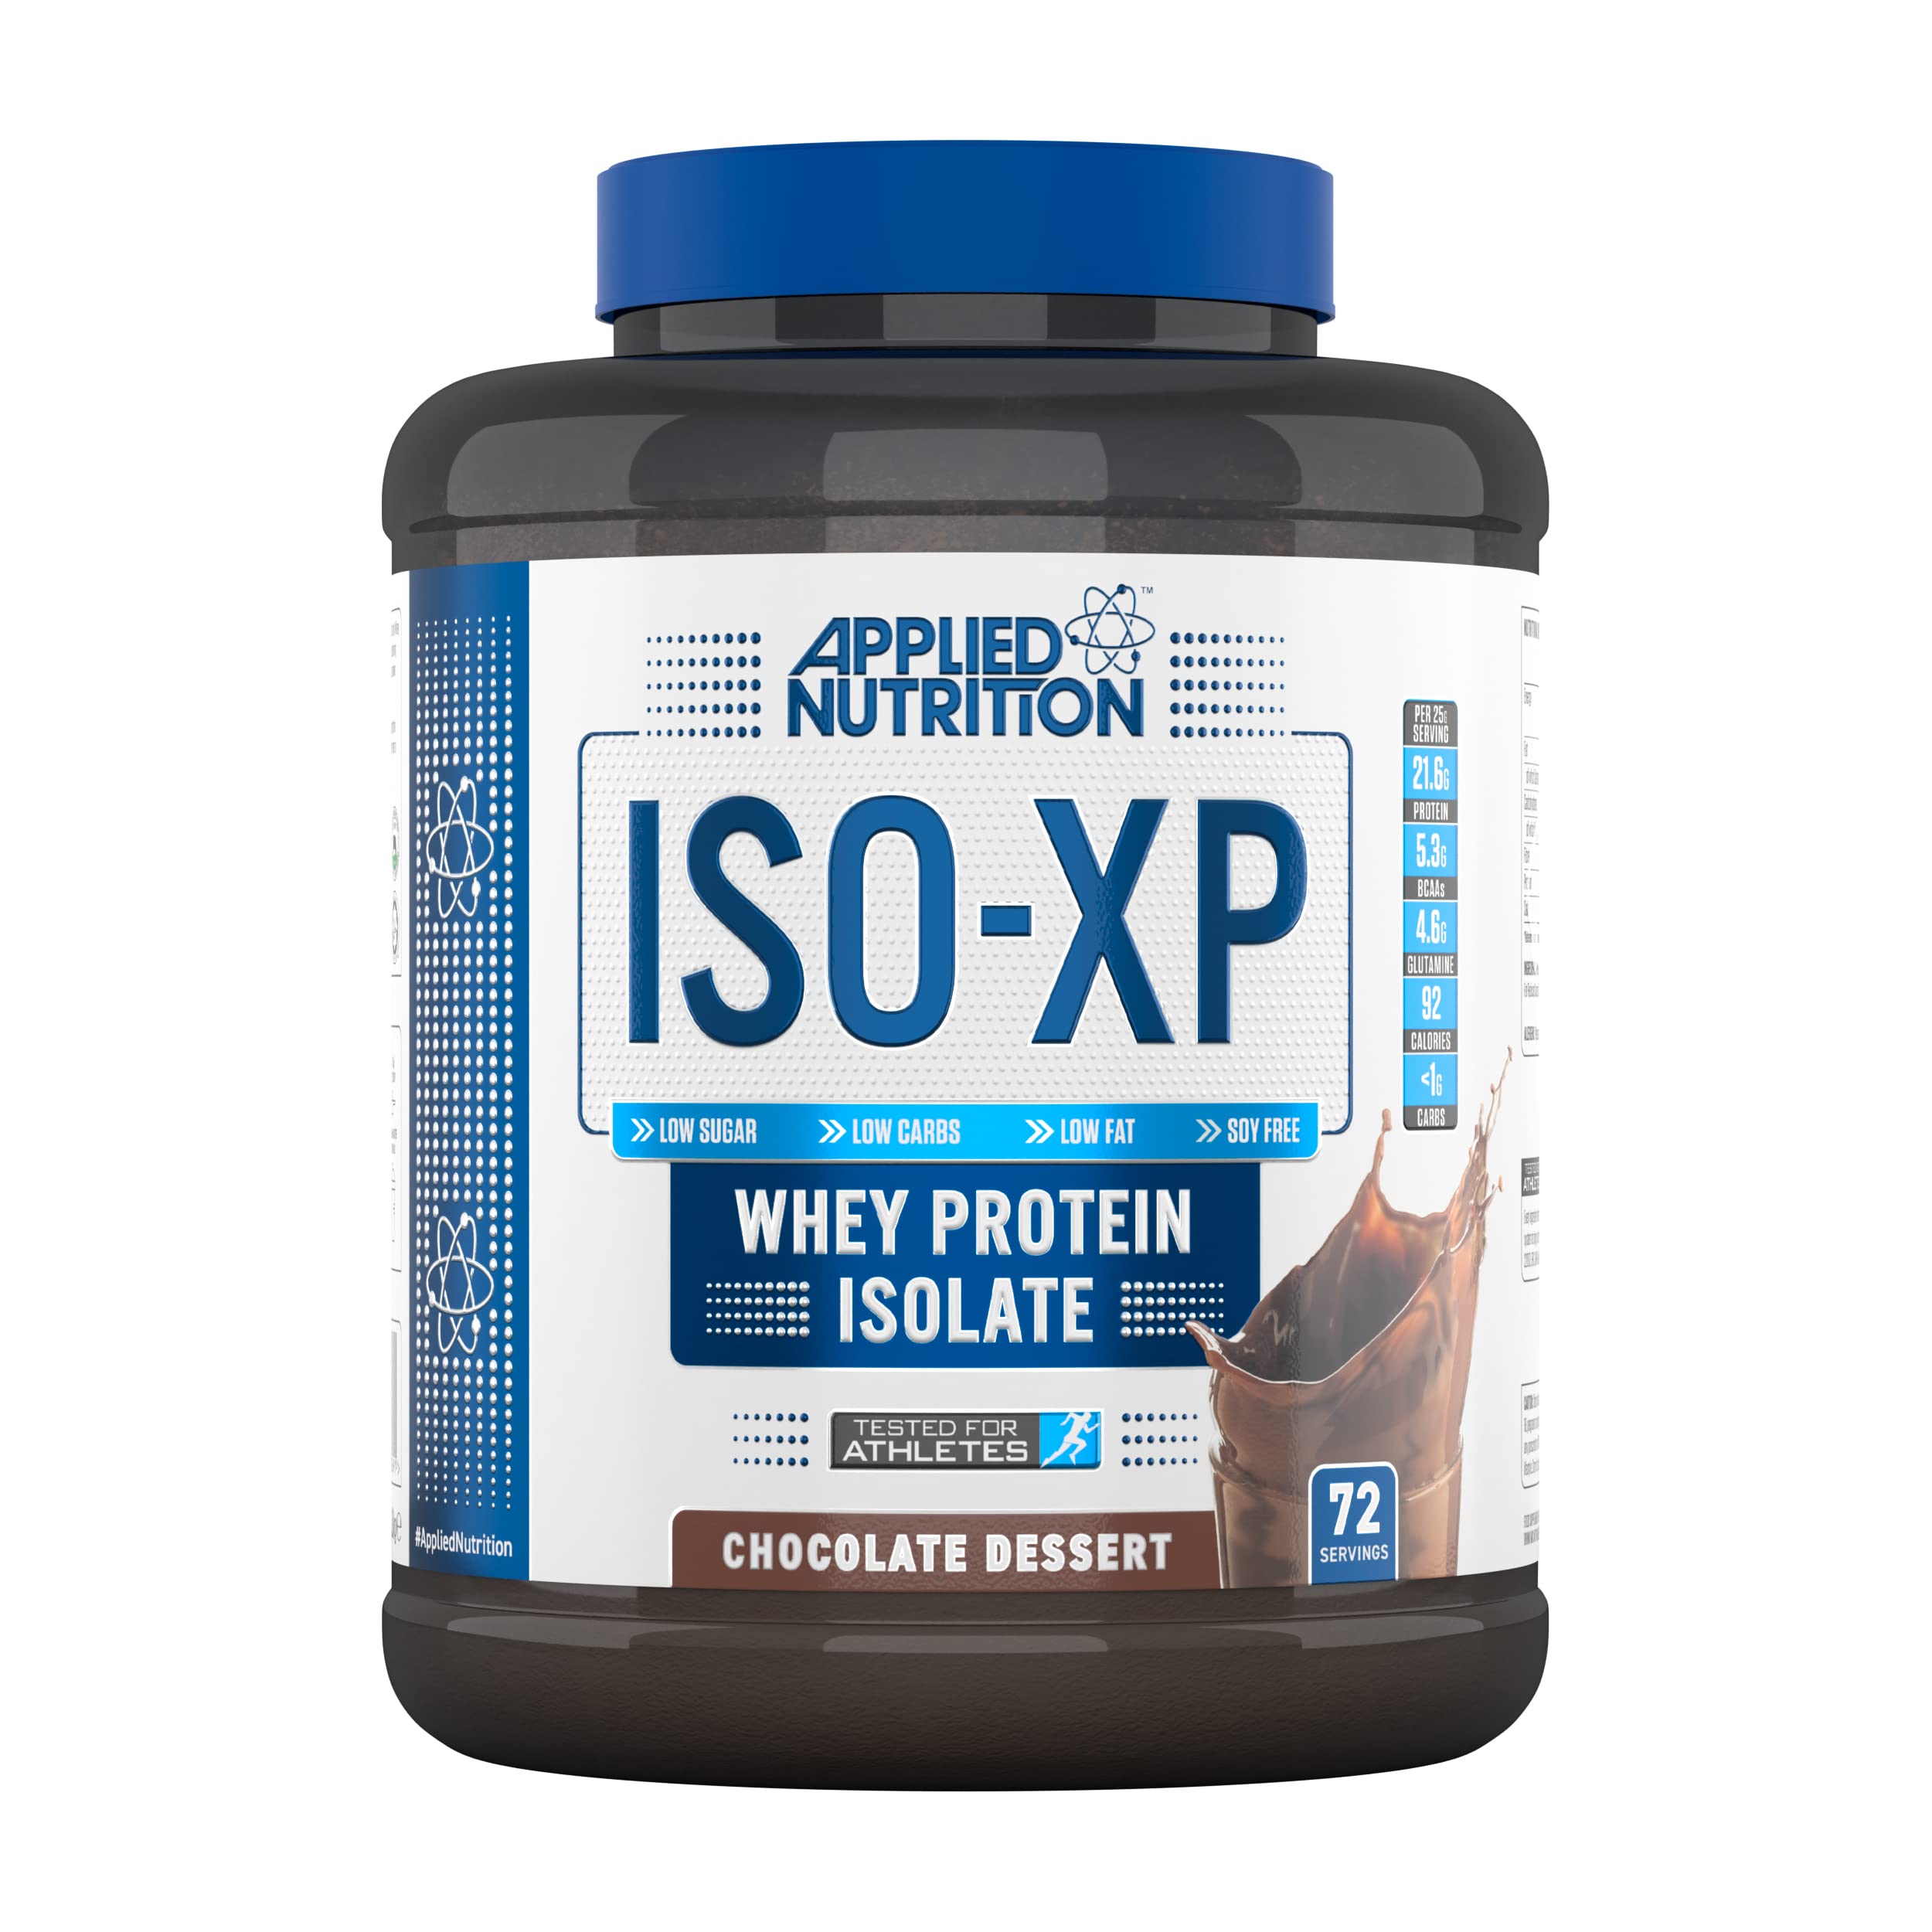 Applied Nutrition ISO XP Whey Isolate - Pure Whey Protein Isolate Powder ISO-XP, ISO Whey Premium with Glutamine and BCAAs (1.8kg - 72 Servings) (Chocolate)